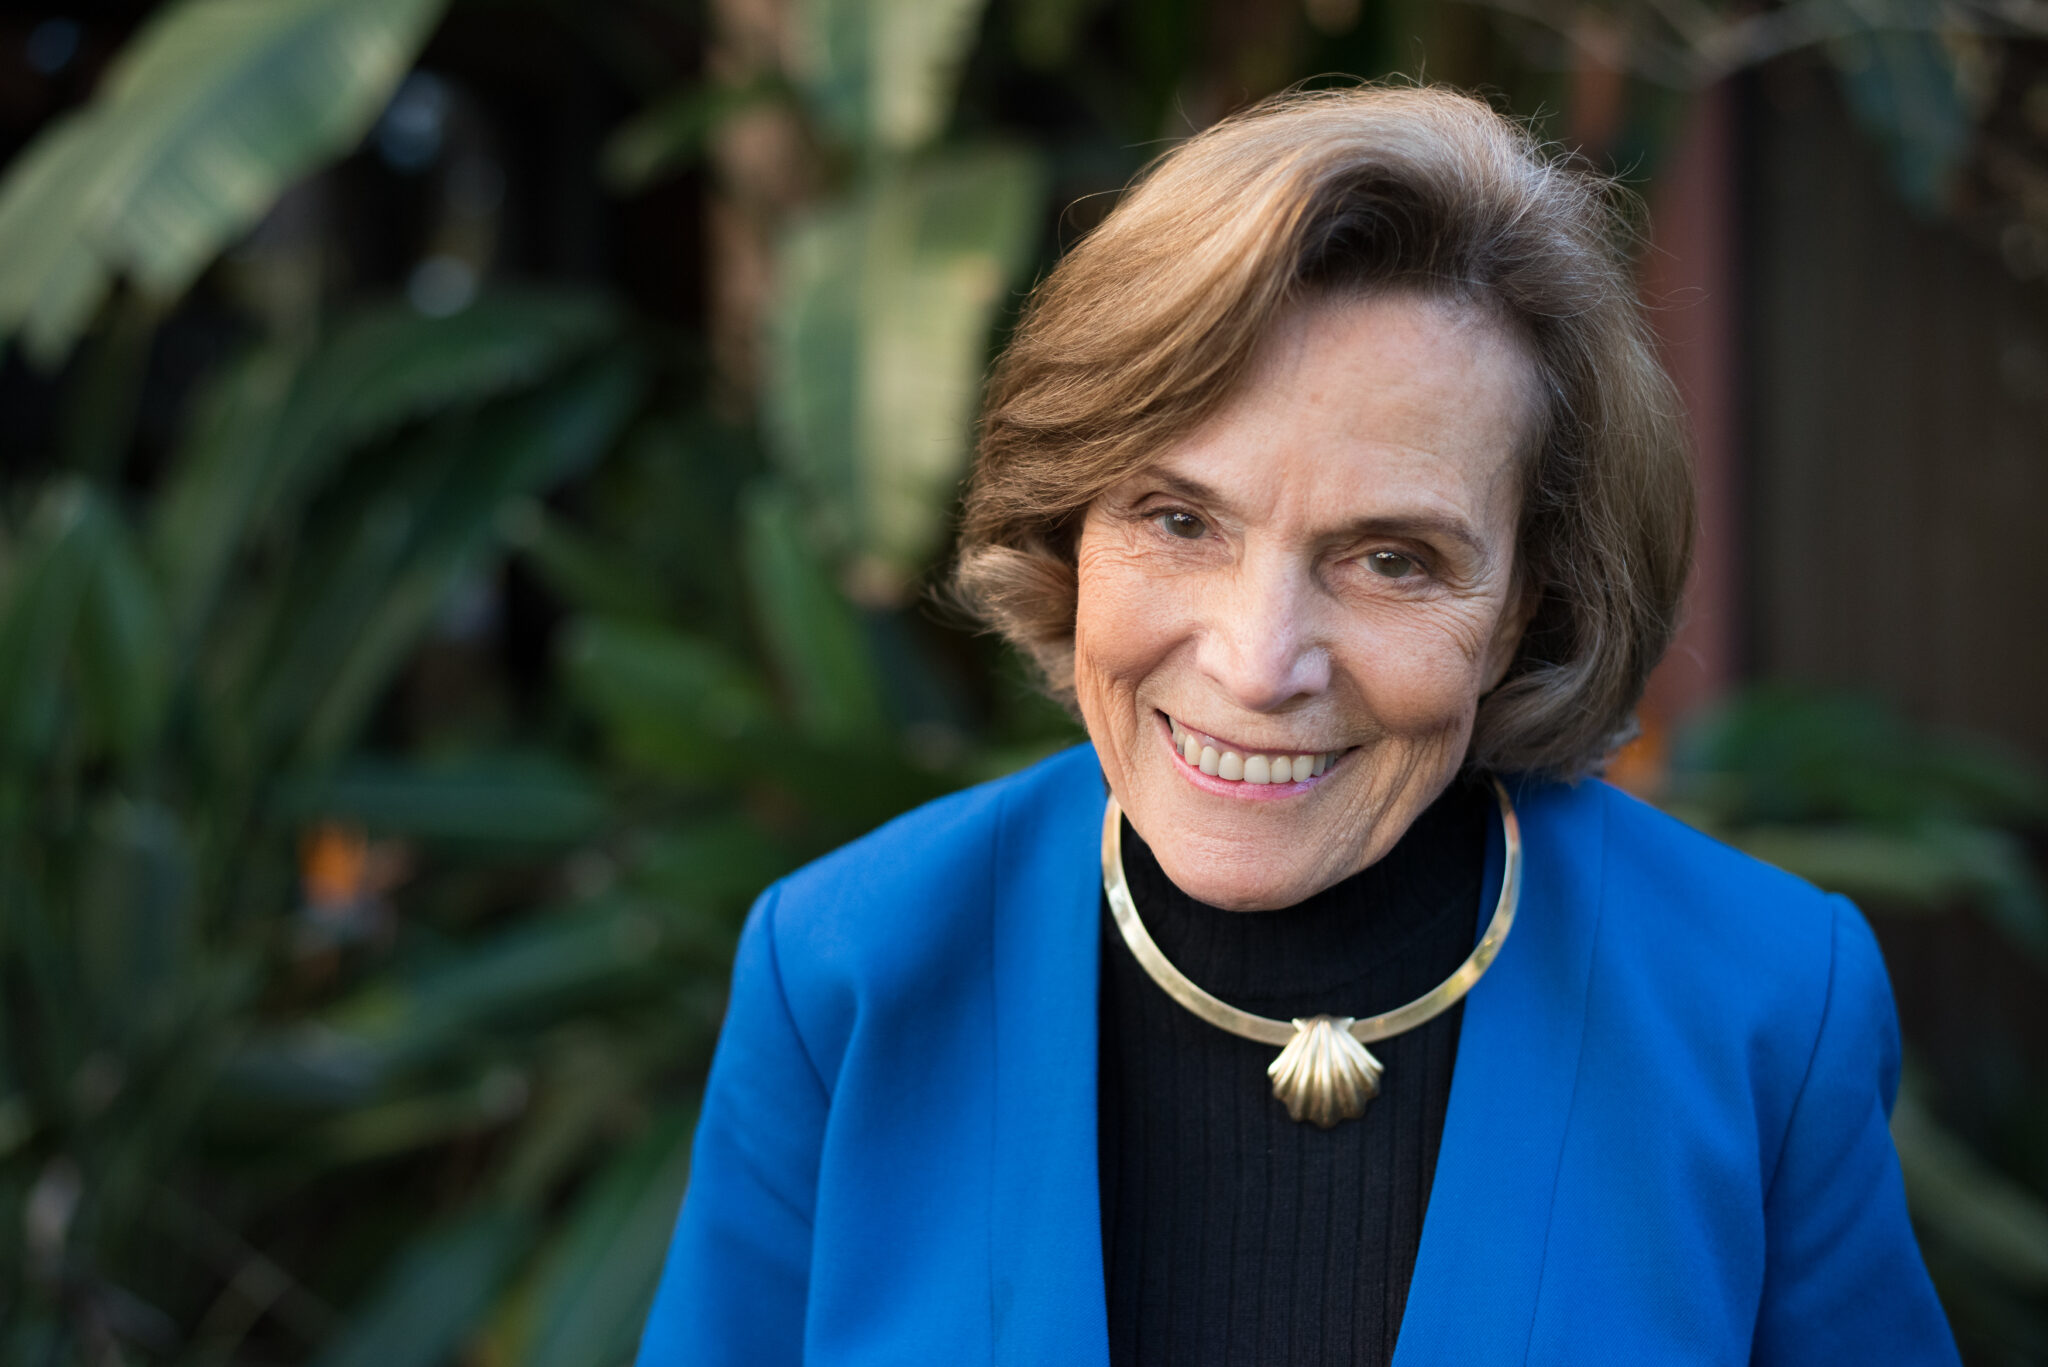 Dr. Sylvia Earle – Generating Hope for the Blue Planet